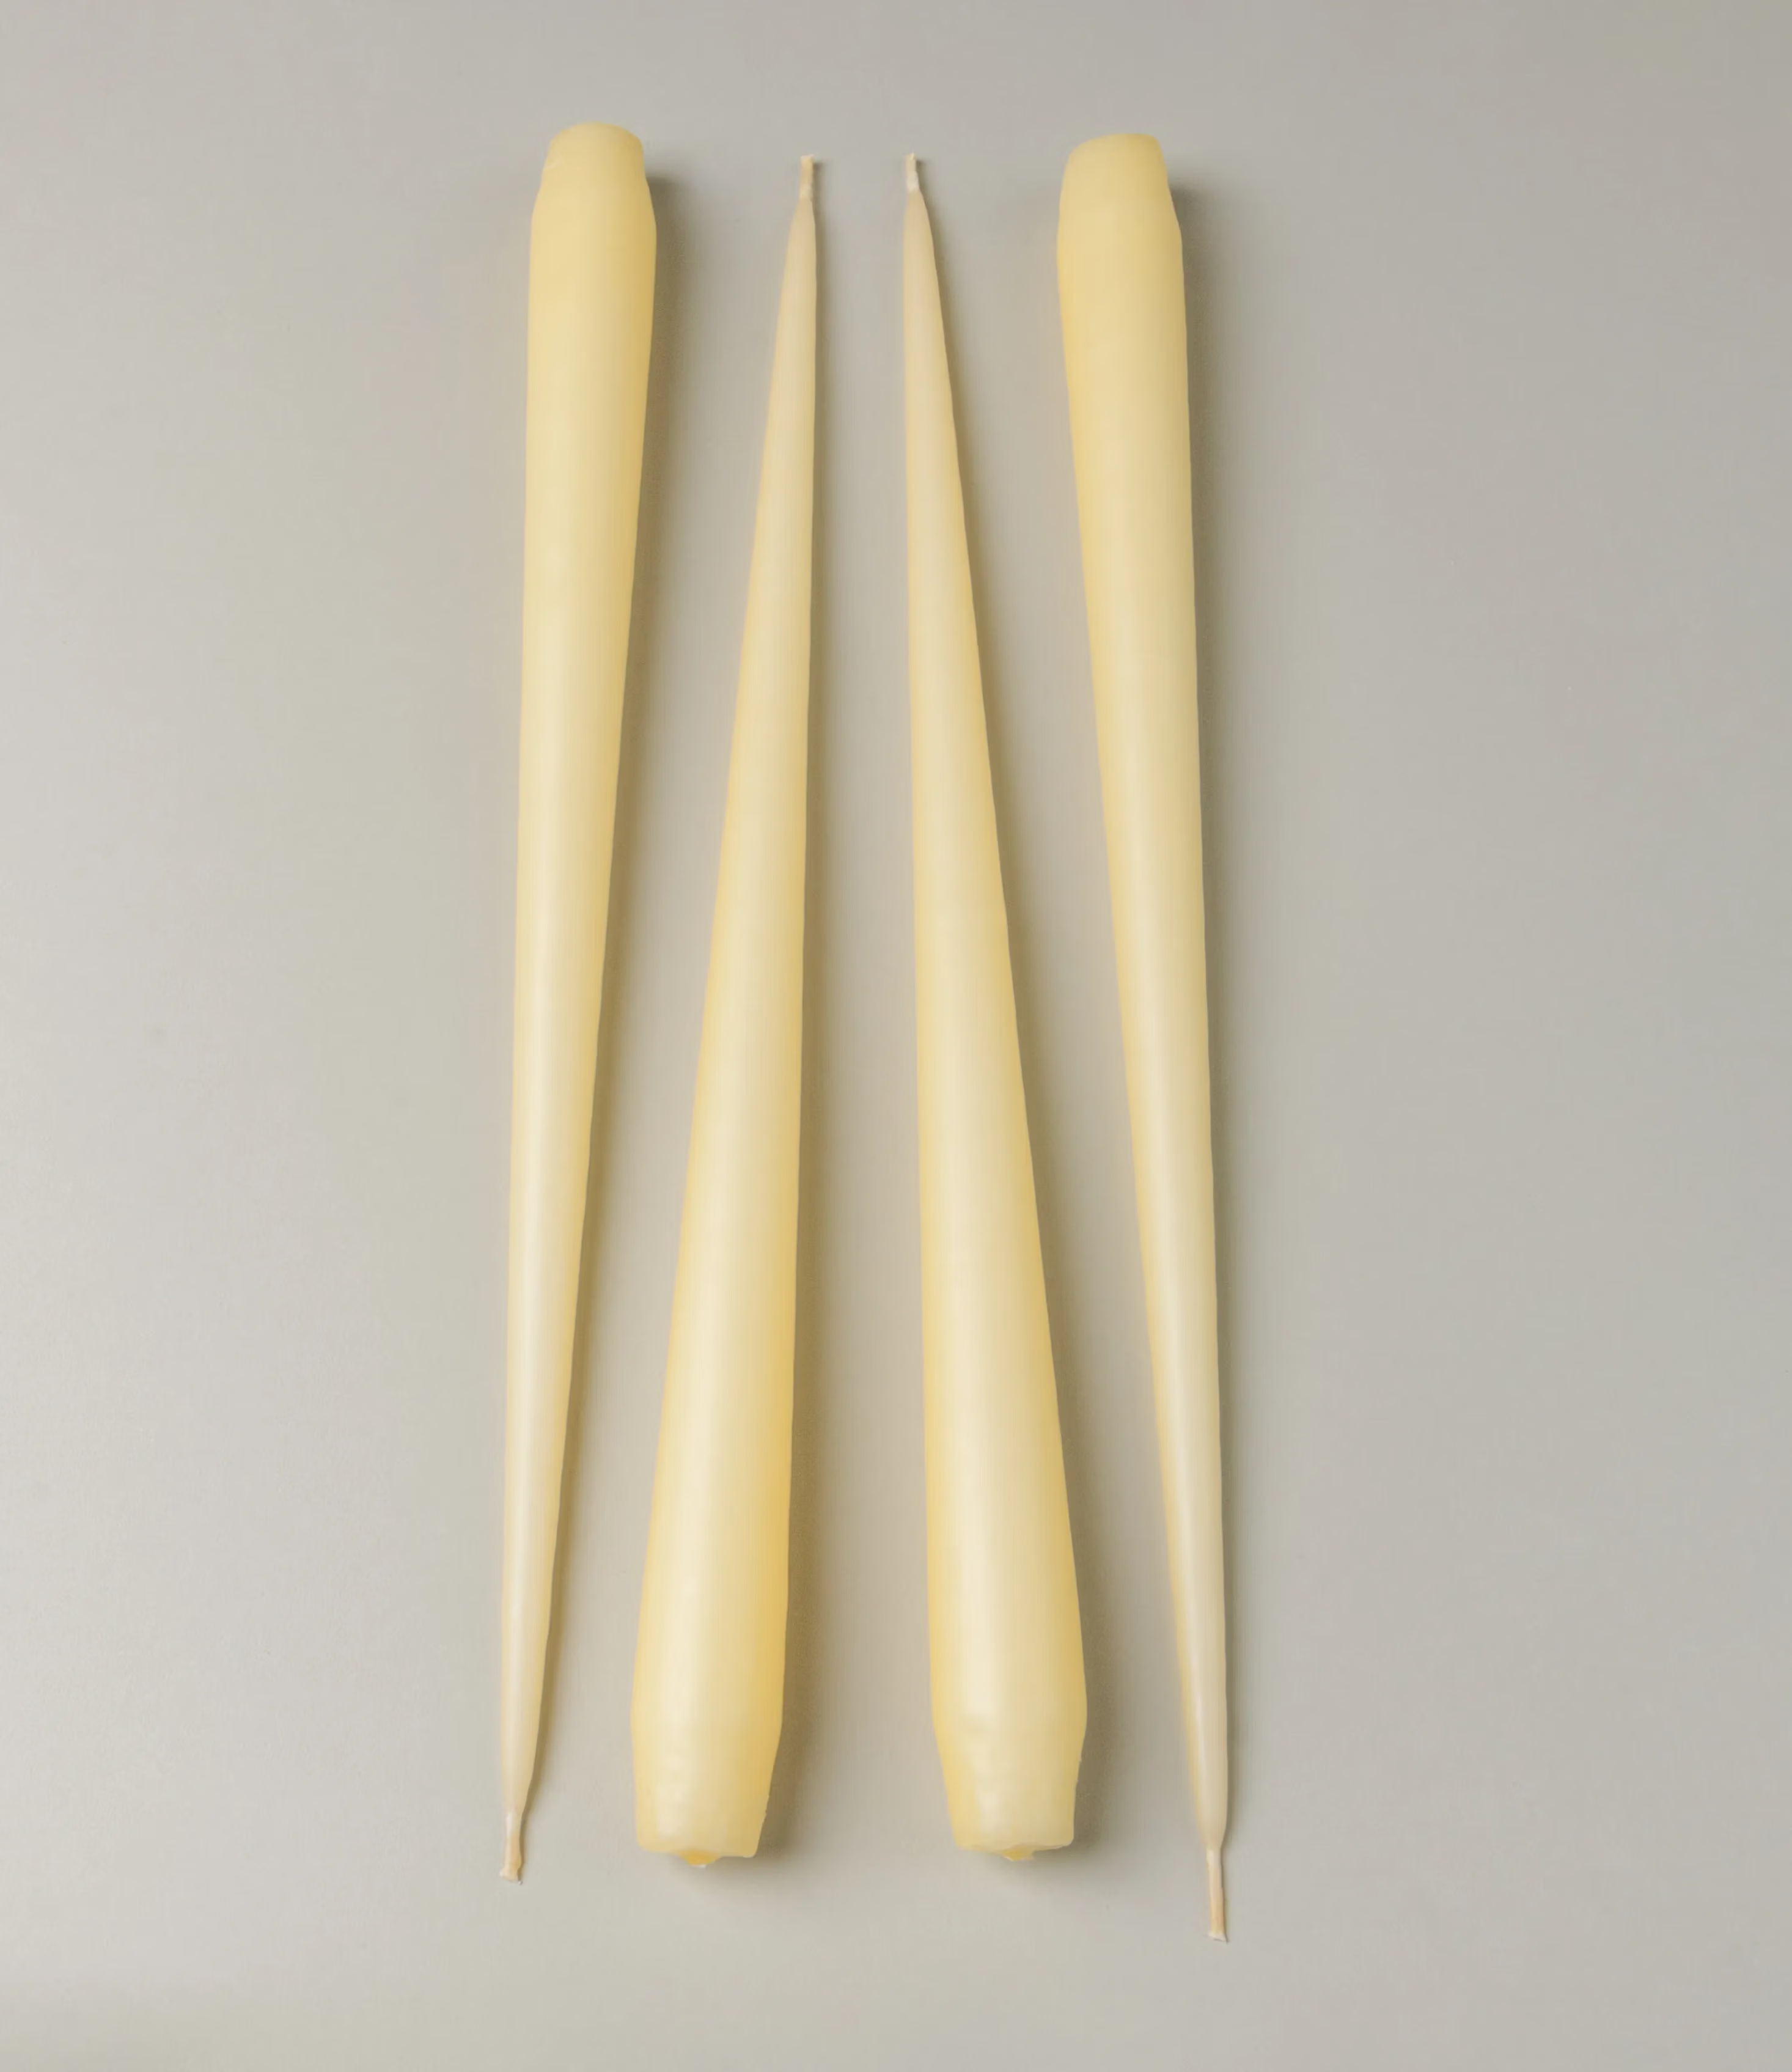 Ester&Erik Taper Candle coming in a buttermilk shade. The package contains 4 taper candles of the same shade.